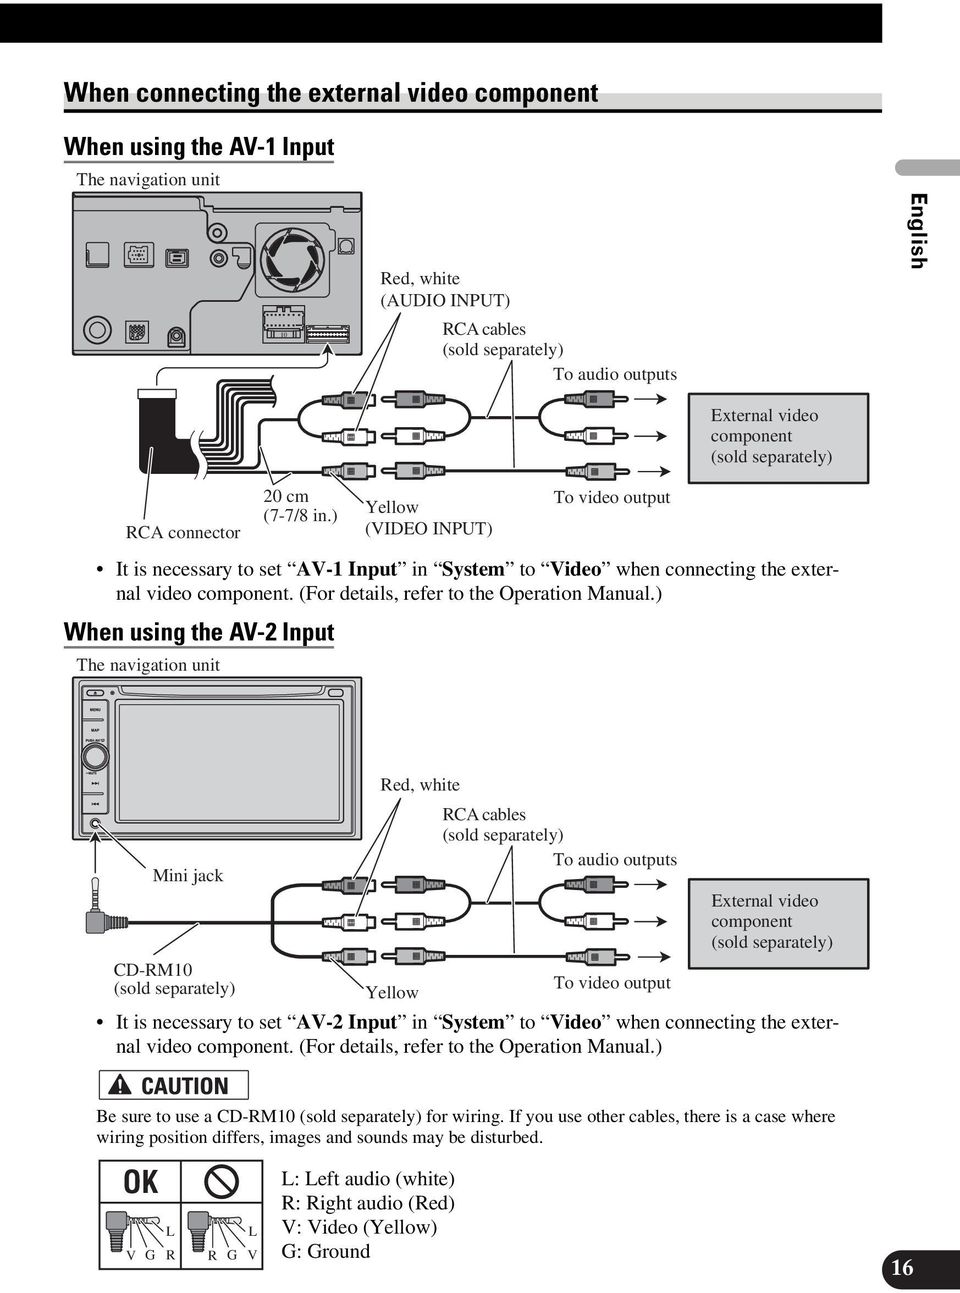 ) When using the AV-2 Input The navigation unit External video component (sold separately) CD-RM10 (sold separately) To video output Yellow It is necessary to set AV-2 Input in System to Video when